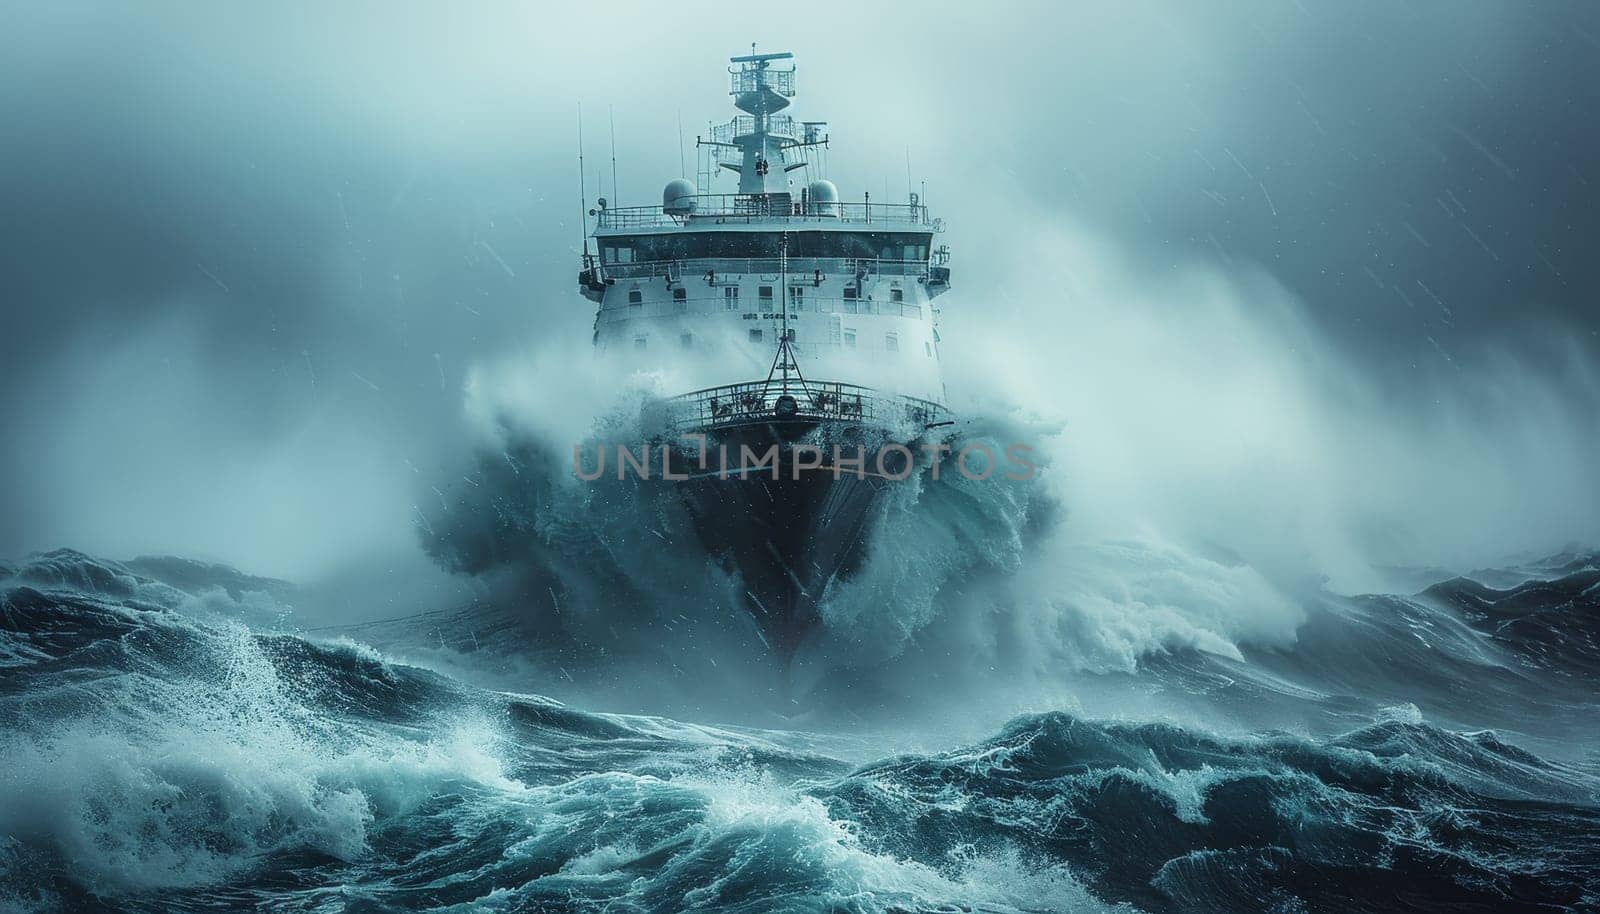 A large ship is in the middle of a stormy sea by AI generated image.